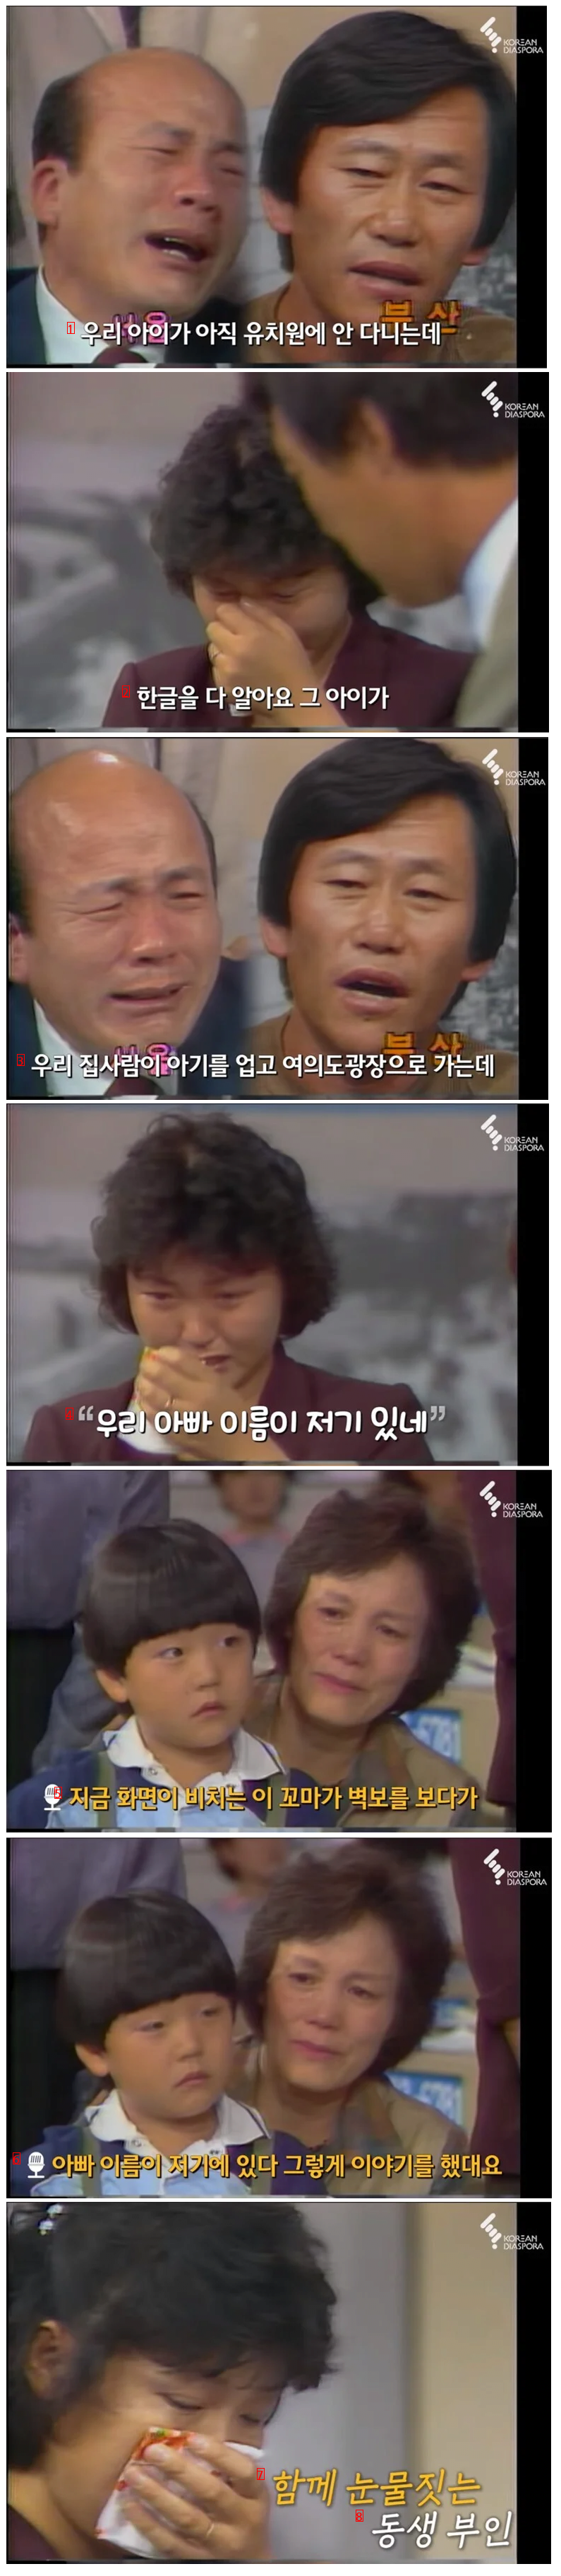 A separated family reunited thanks to their son who knew how to read Korean.jpg